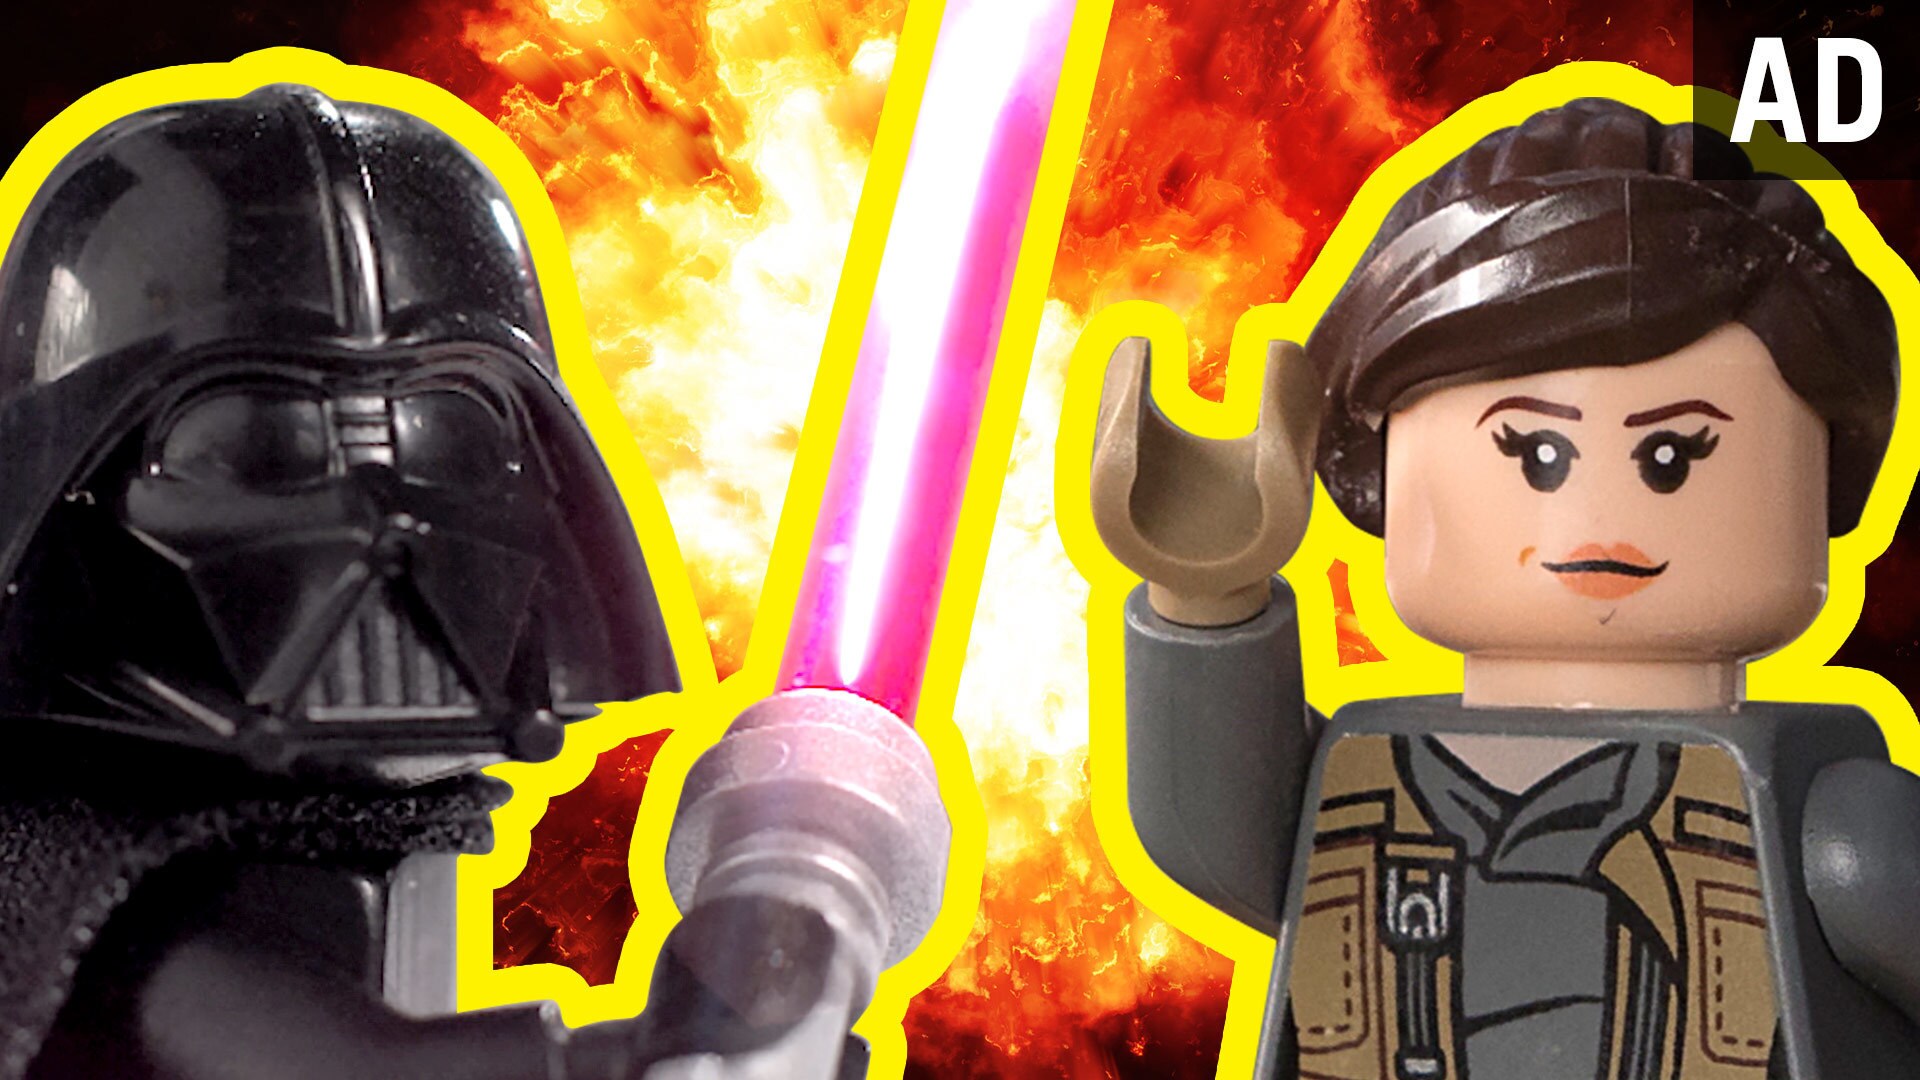 Star Wars: Rogue One As Told By LEGO